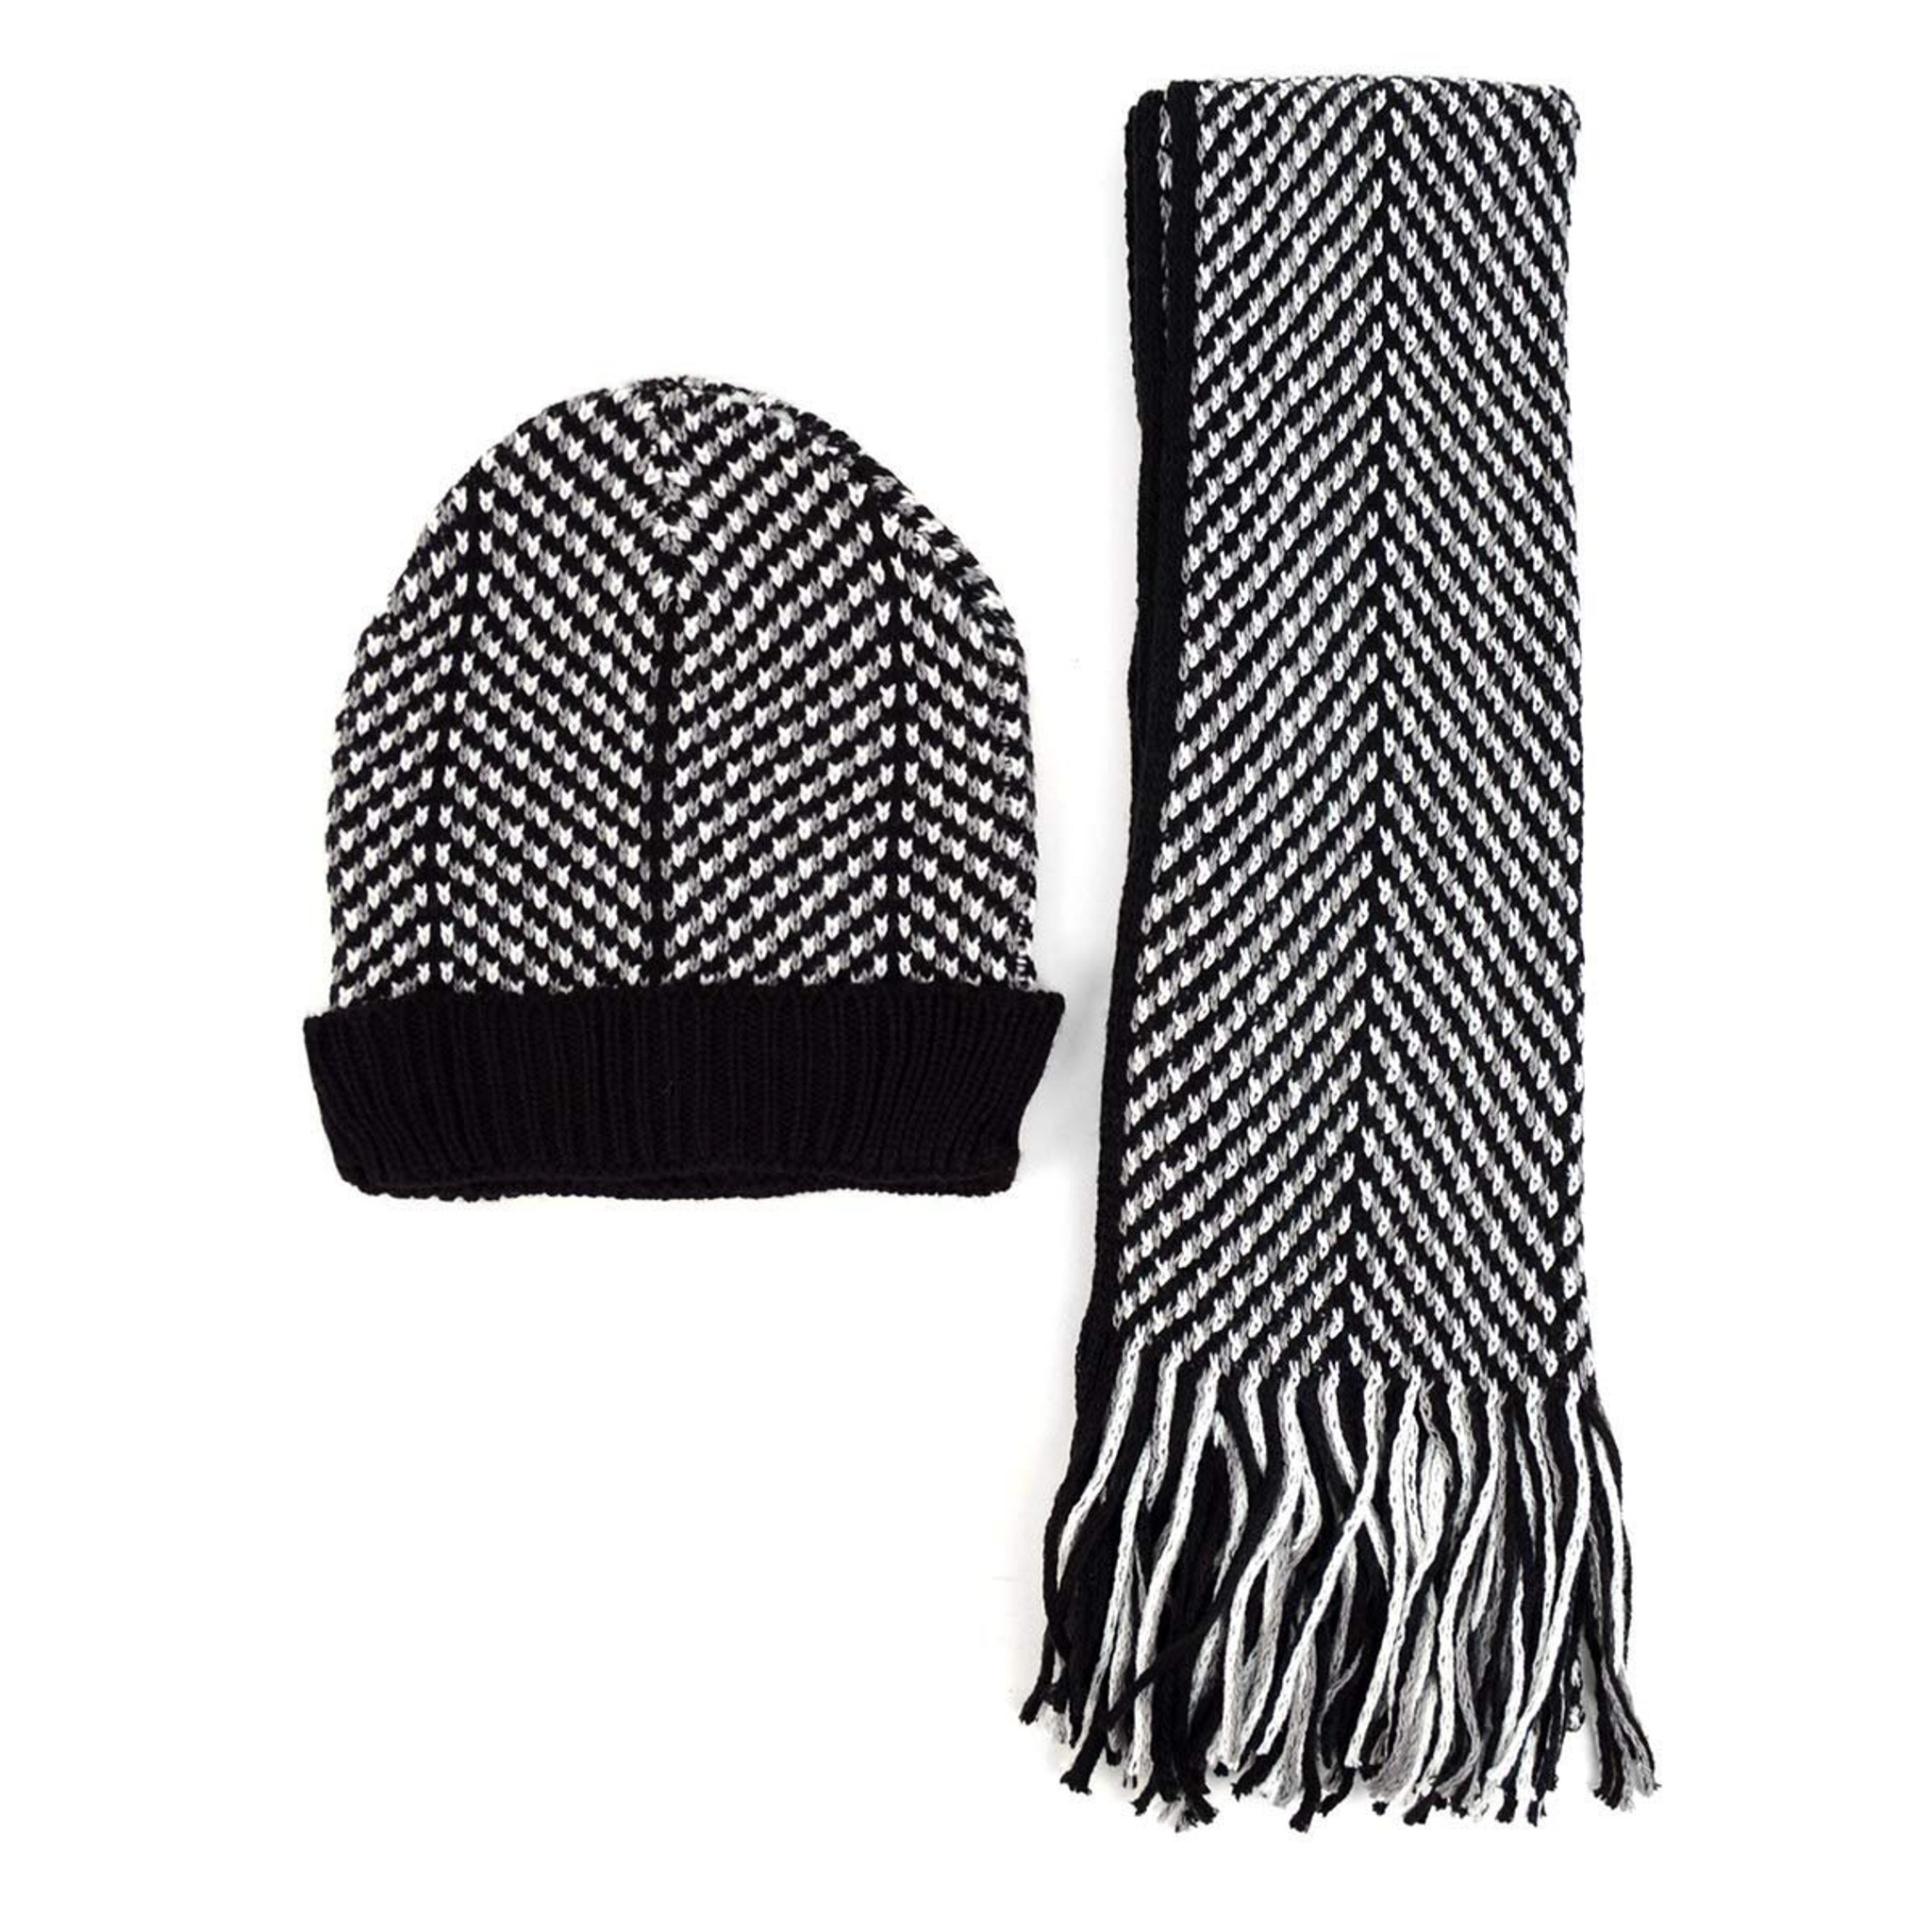 Men's Winter Hat and Scarf